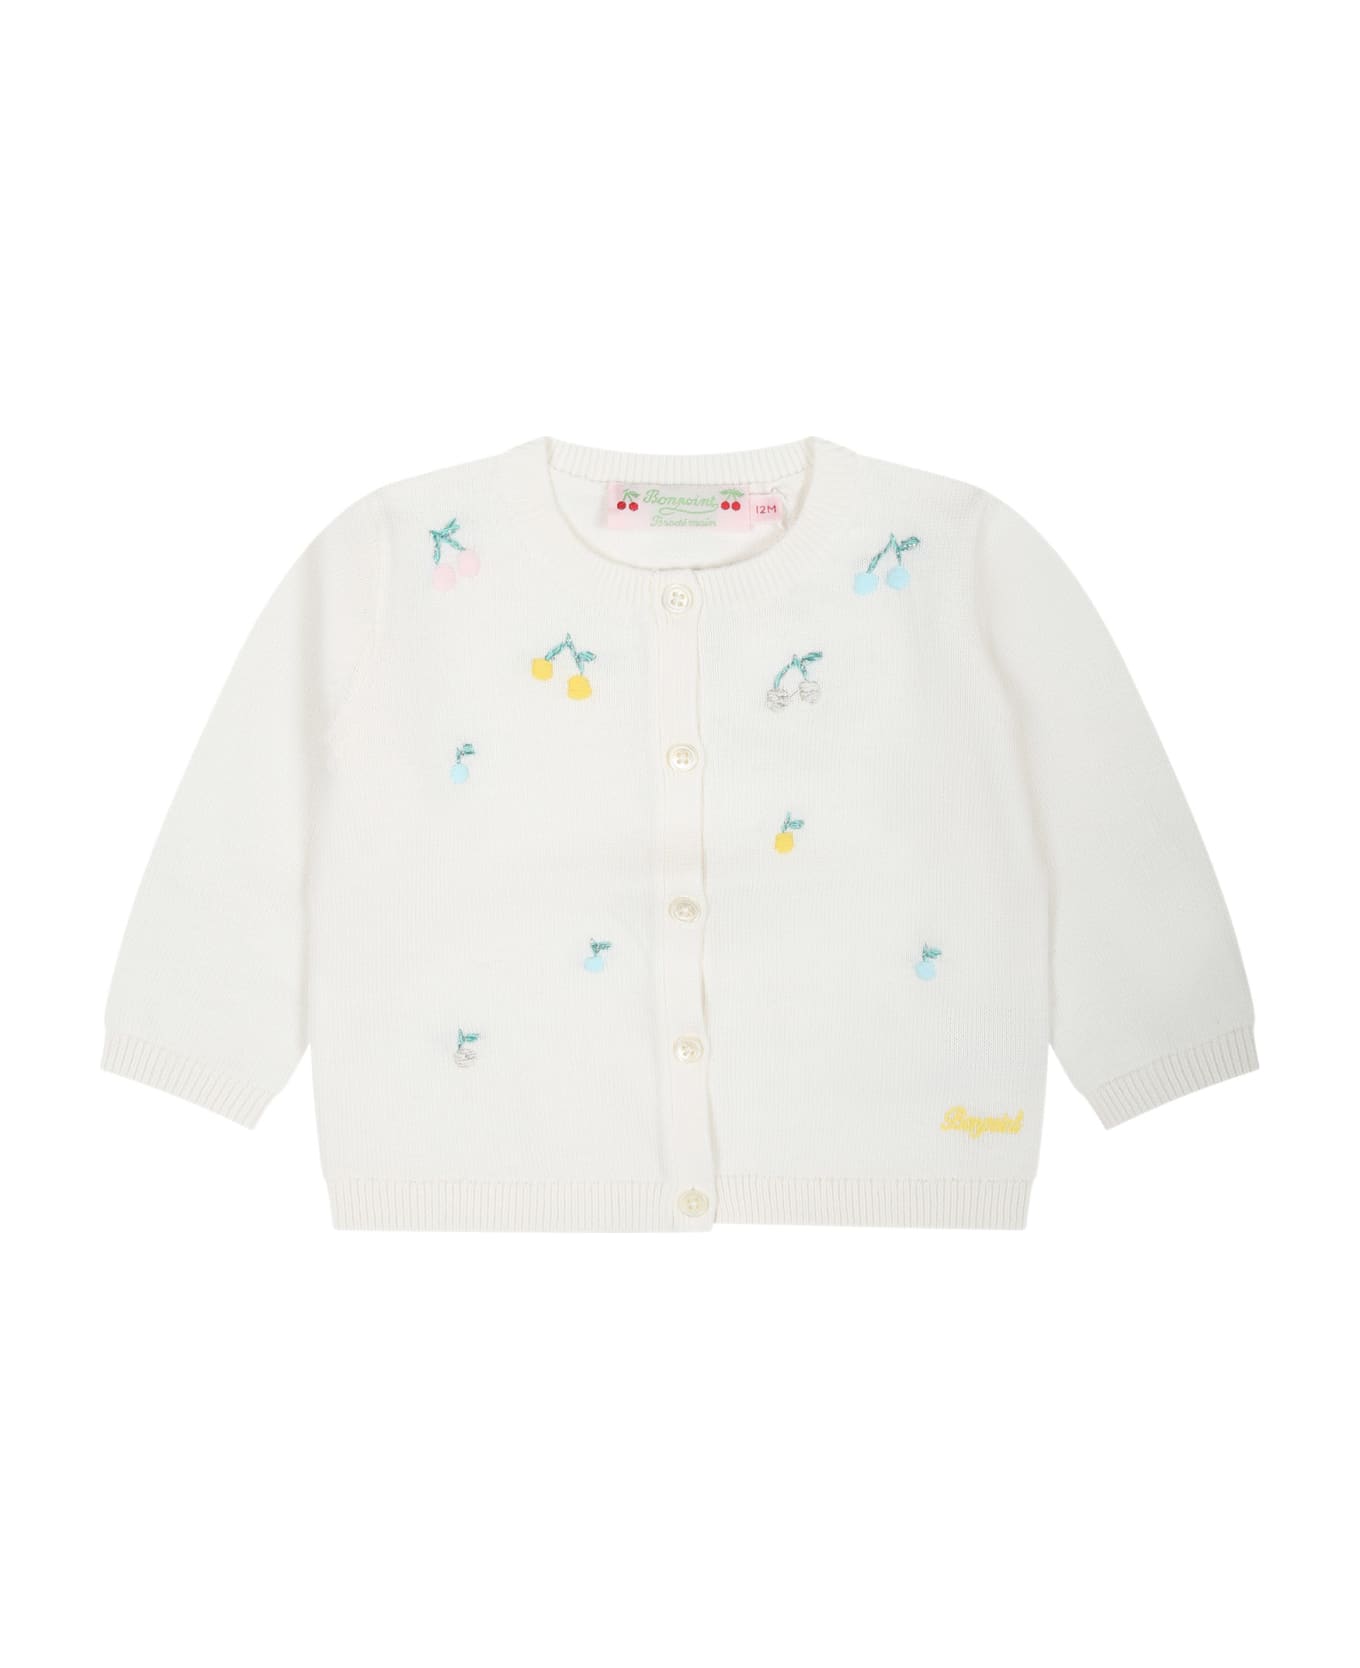 Bonpoint White Cardigan For Baby Girl With All-over Embroidered Cherries - Off white